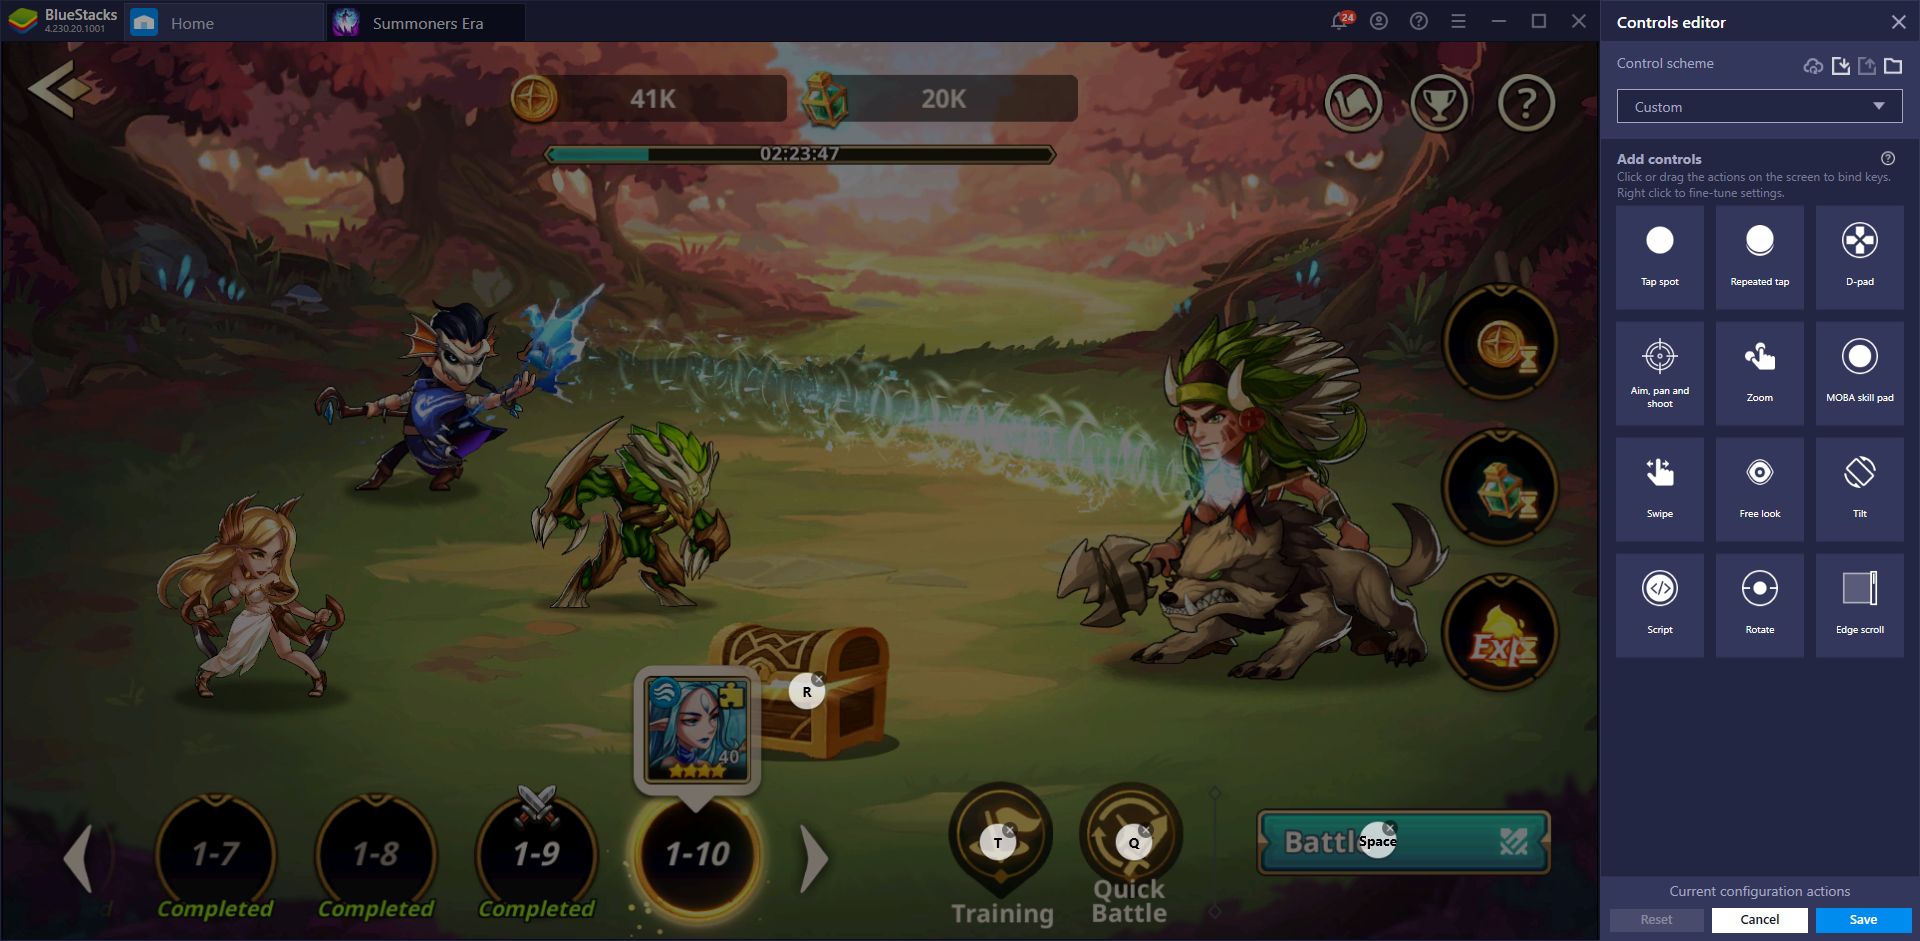 How to Play Summoners Era on PC with BlueStacks